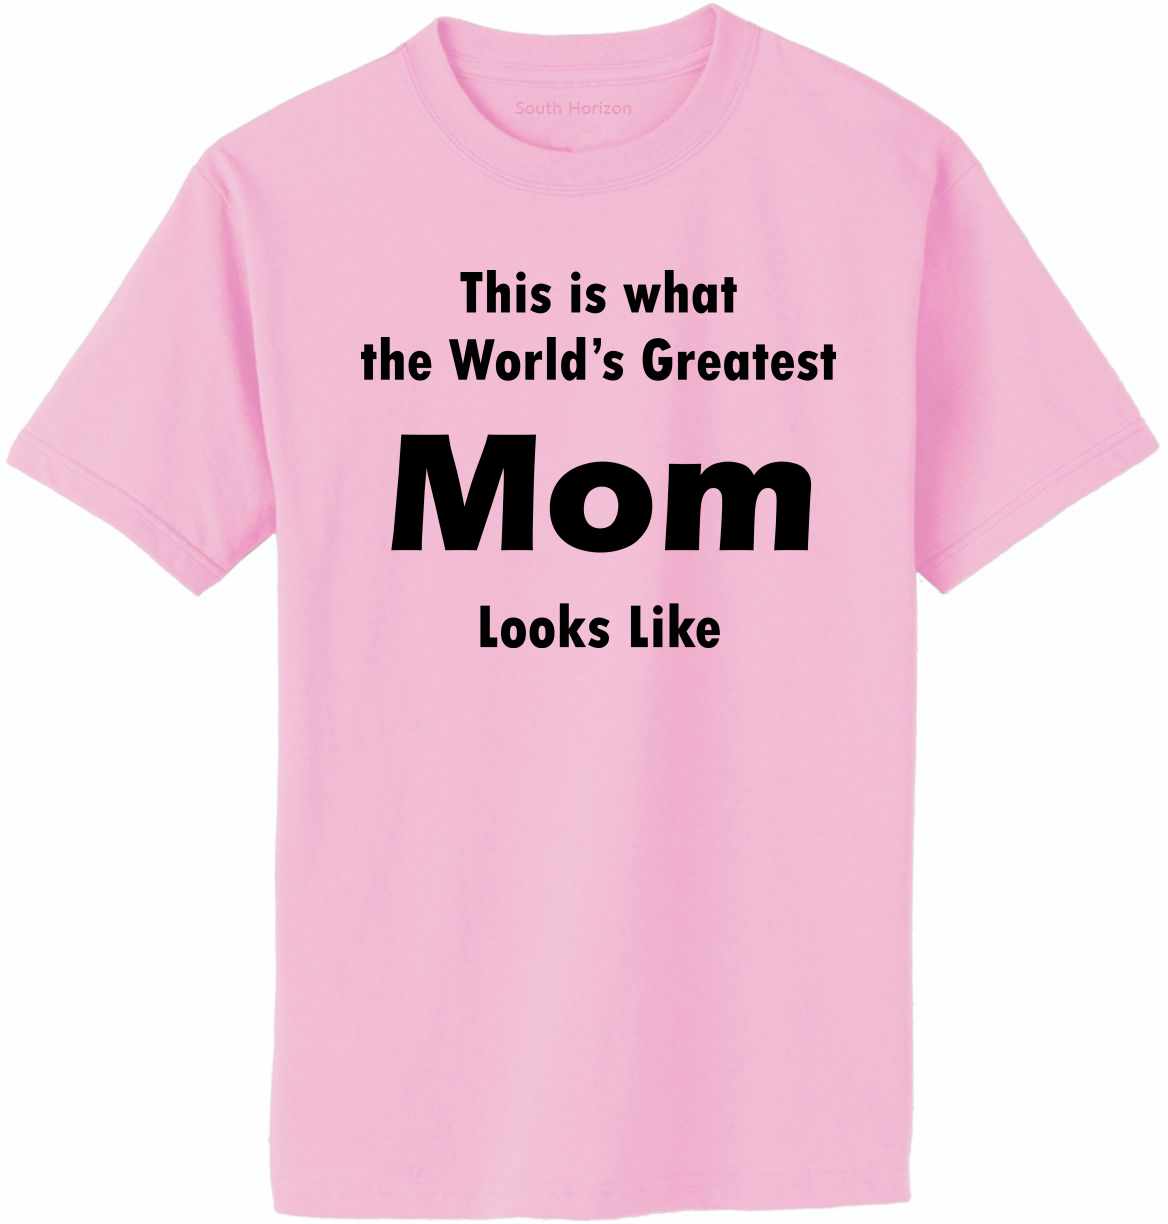 This is what the World's Greatest Mom Looks Like Adult T-Shirt